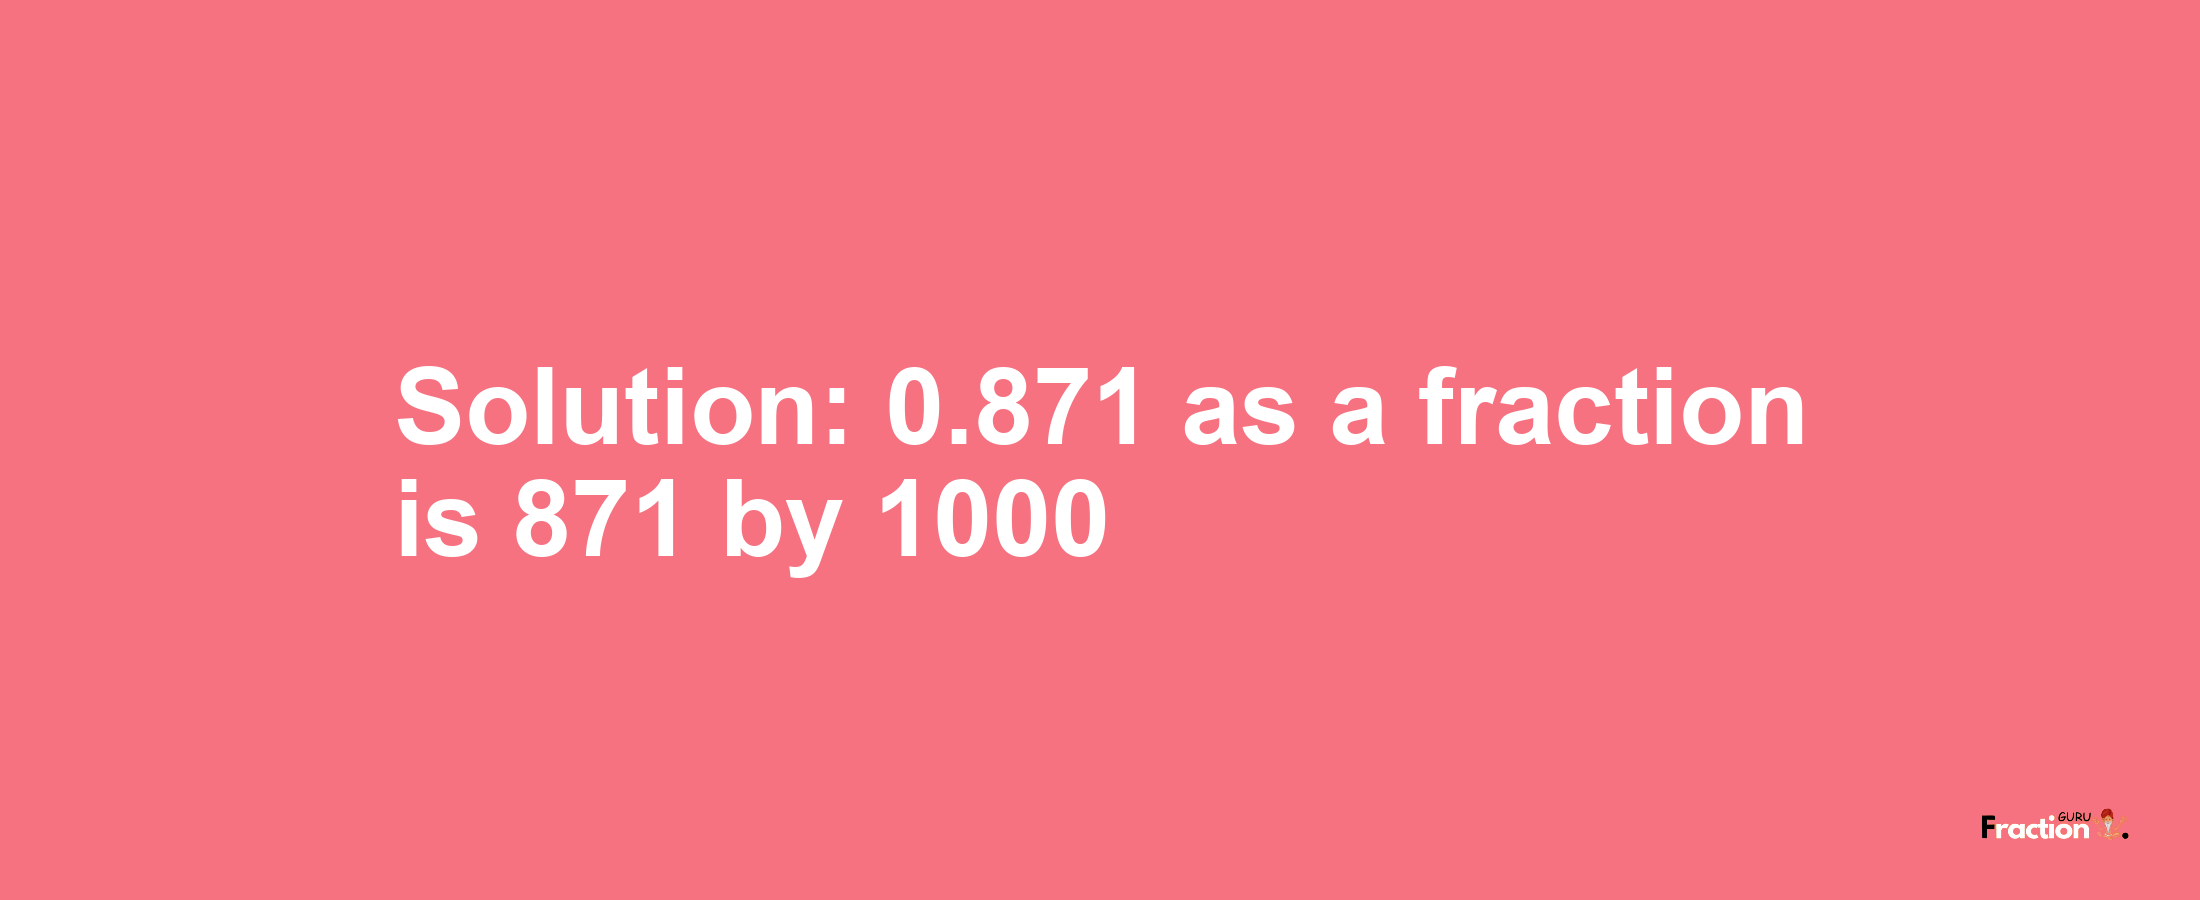 Solution:0.871 as a fraction is 871/1000